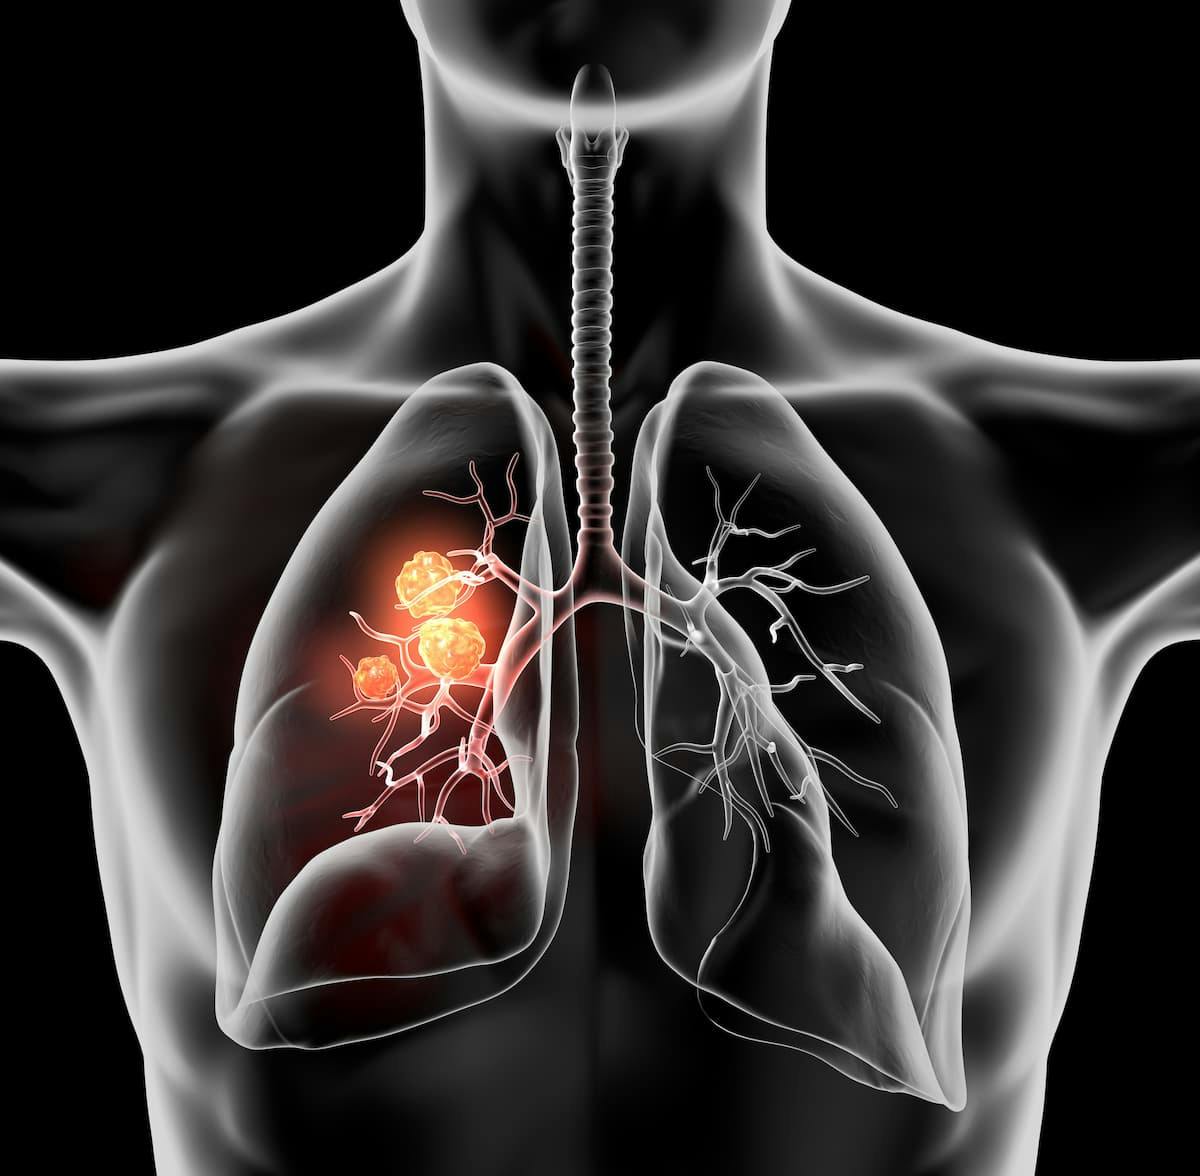 A  contingent of patients with a type of lung cancer and breast cancer continues to experience responses to treatment with zotatifin, according to updated study findings.